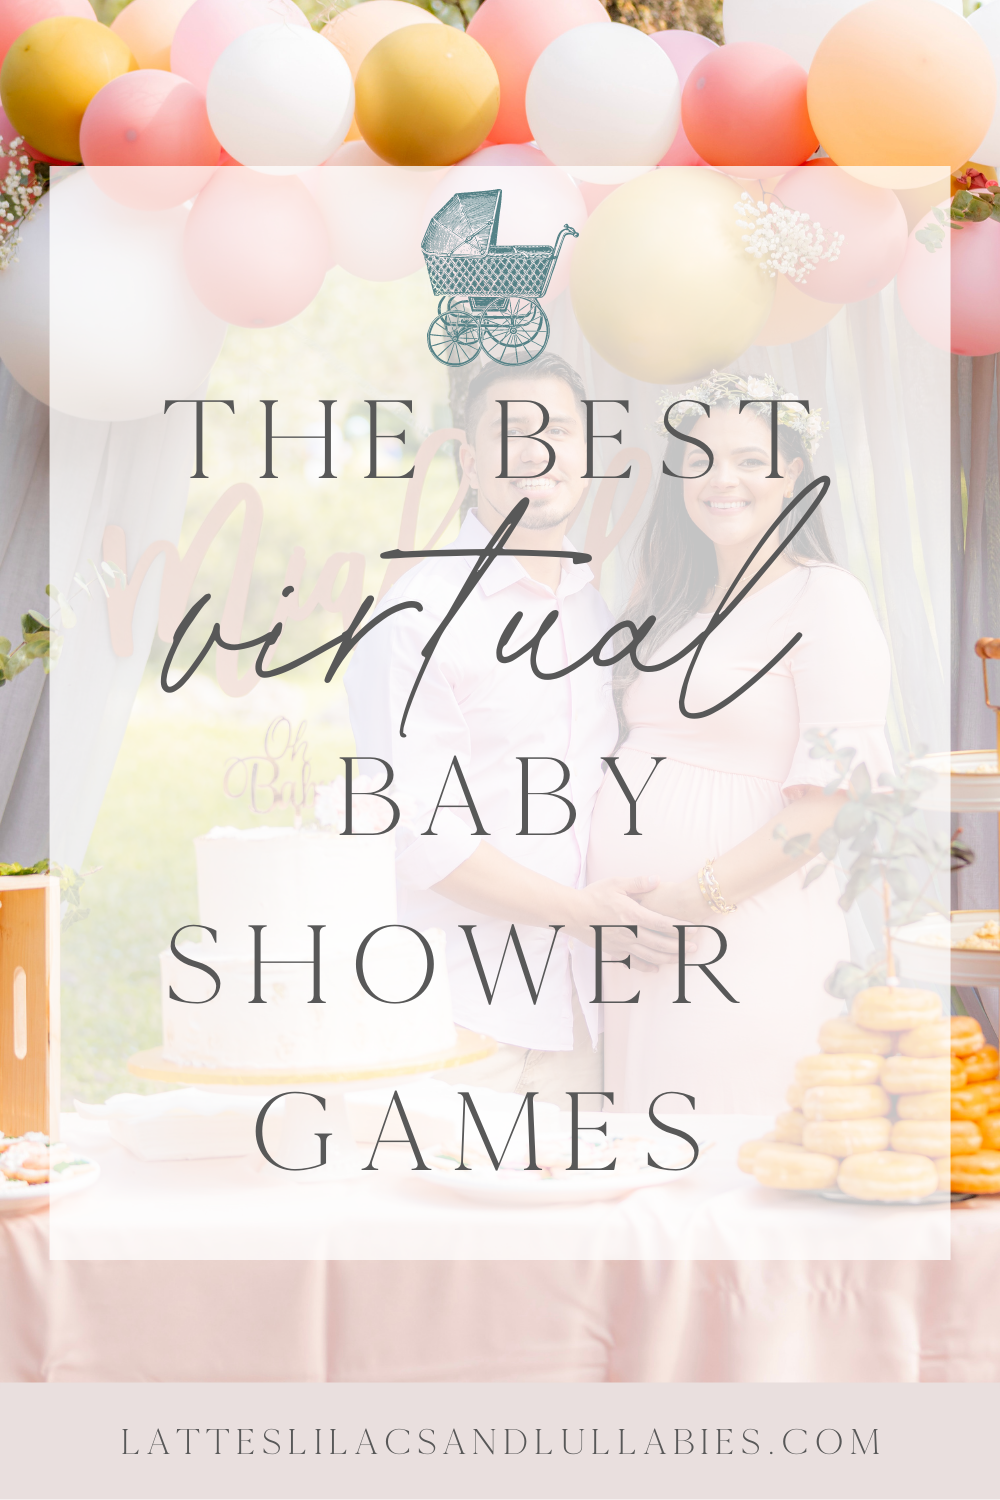 The Best Virtual Baby Shower Games: Fun Activities to Enjoy Over Zoom